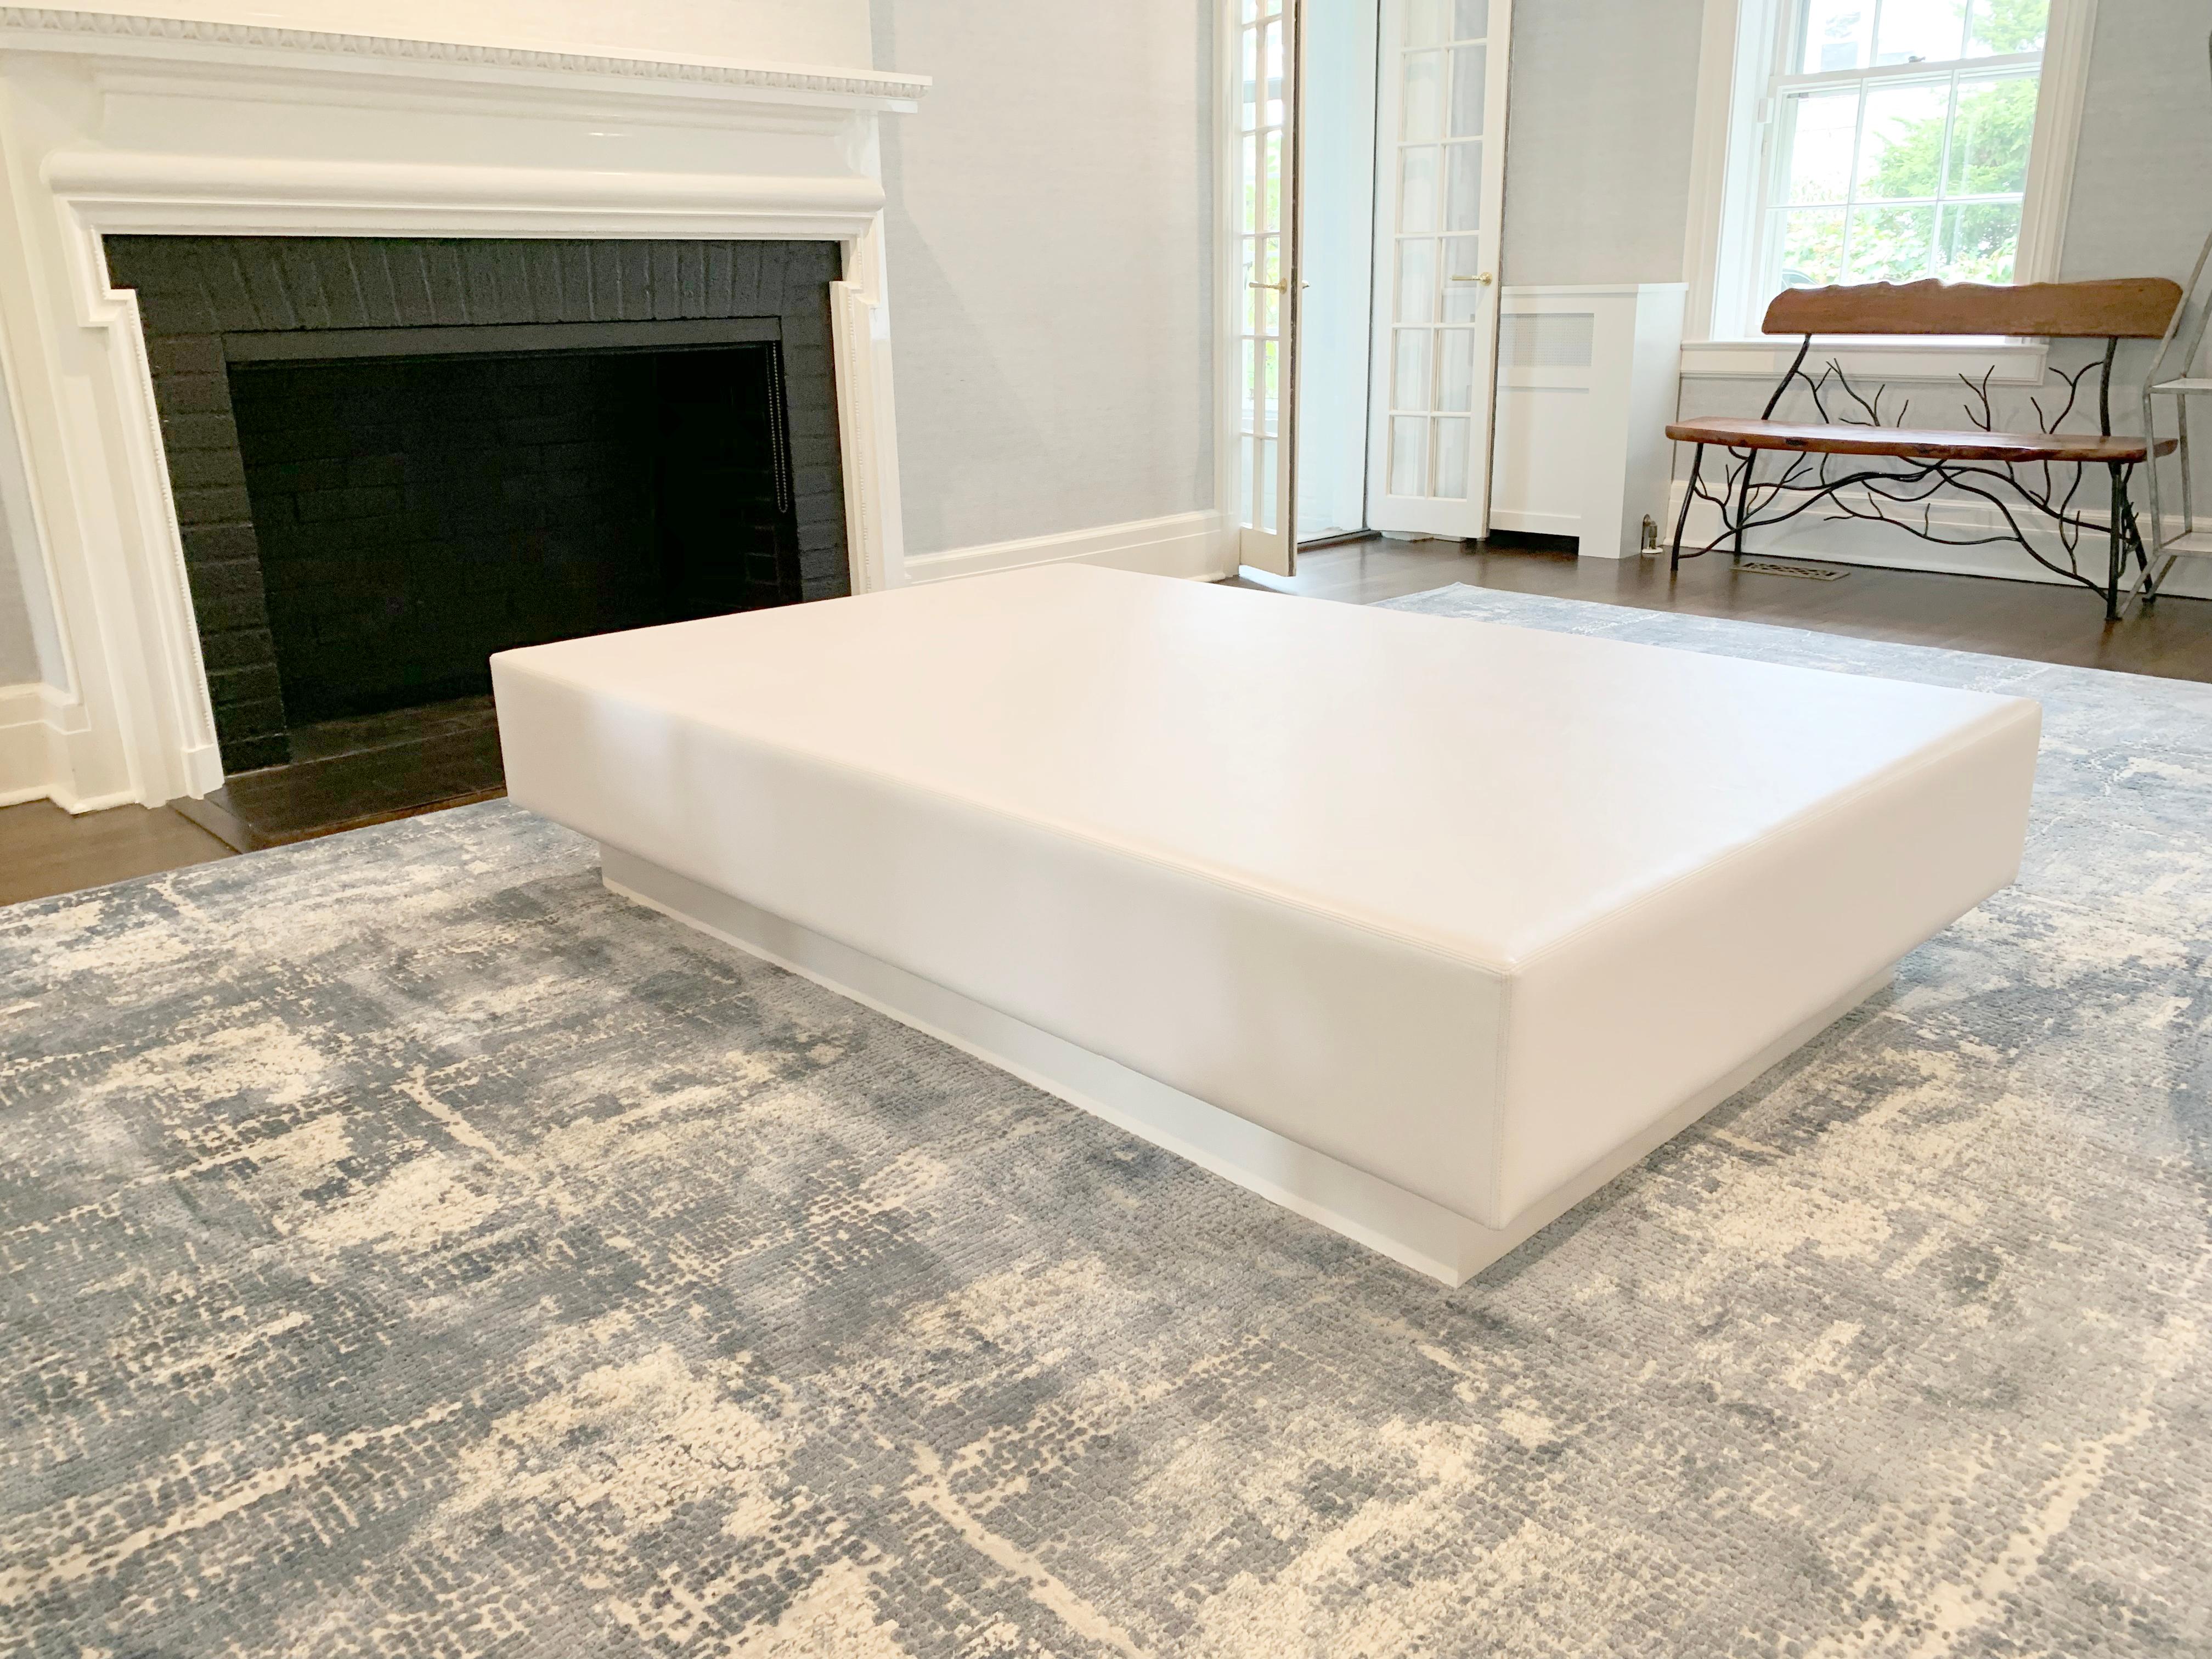 A long rectangular coffee table inspired by simple and modern design. The top is lightly padded and wrapped in a vinyl fabric to soften hard edges and protect against spills. The wooden base is lacquered in white dove and recessed for a floating top